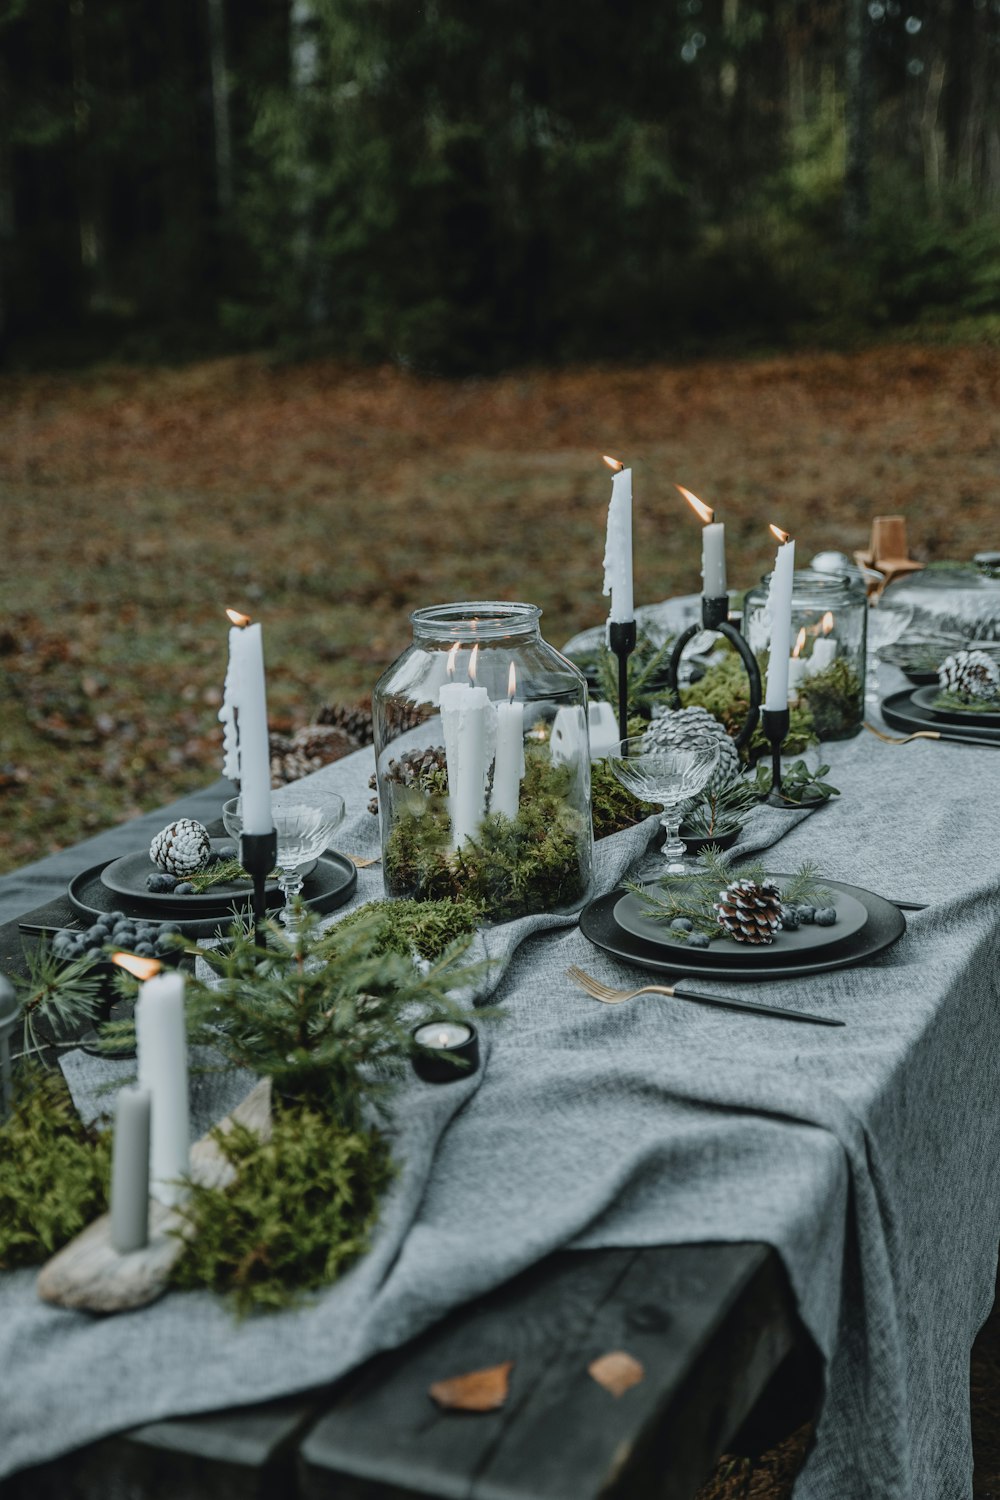 a long table with candles and plates on it